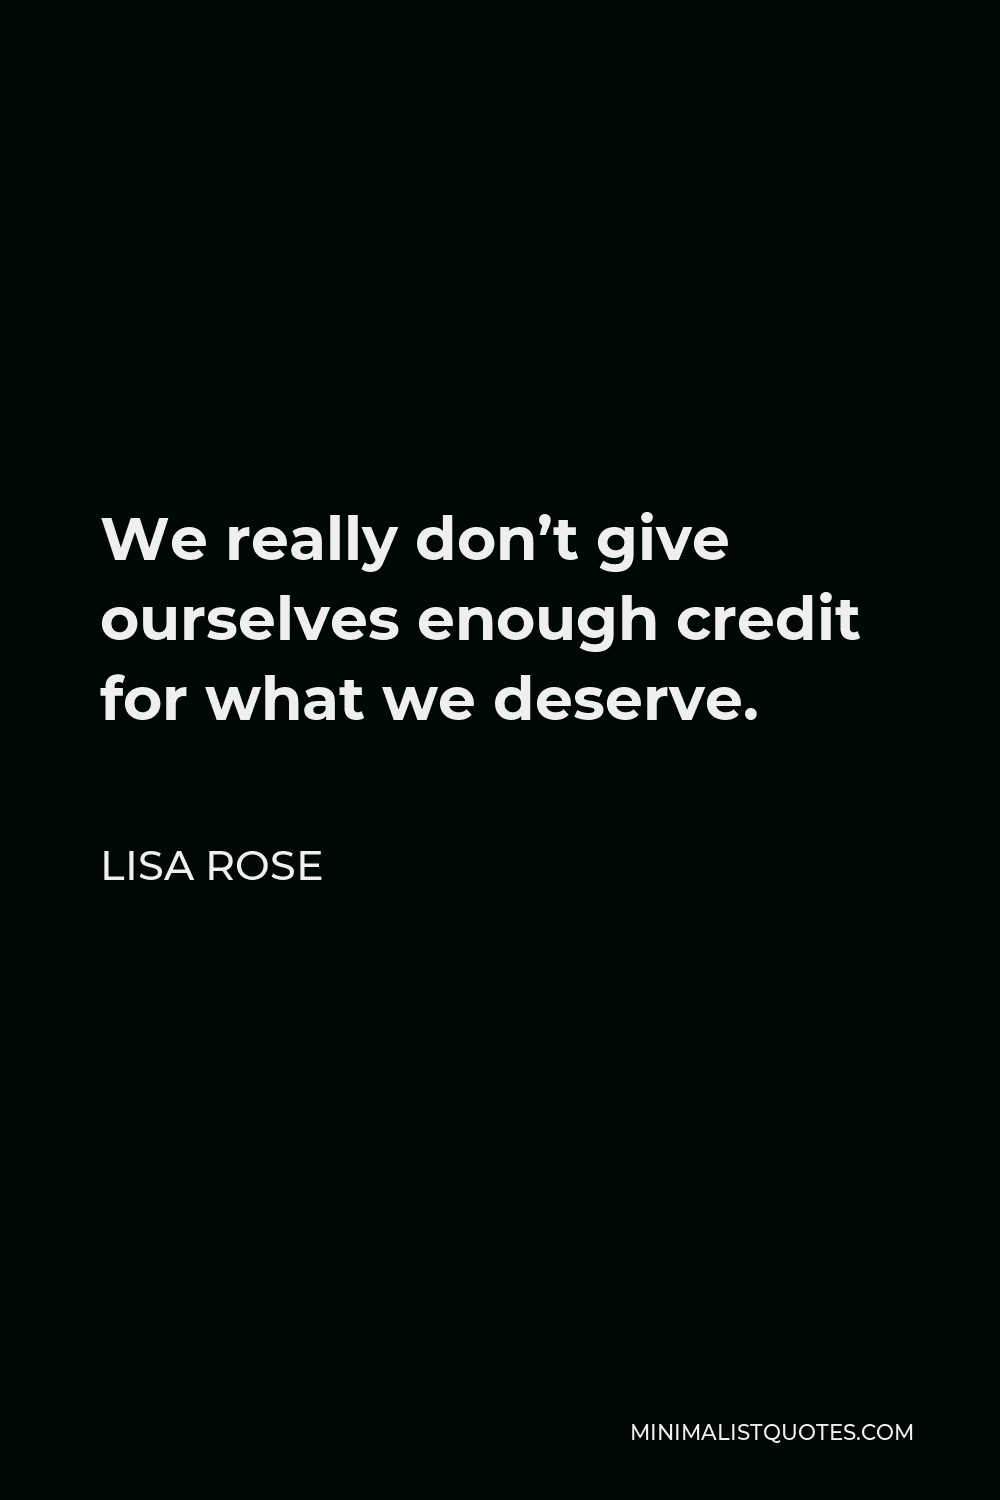 Lisa Rose Quote - We really don’t give ourselves enough credit for what we deserve.